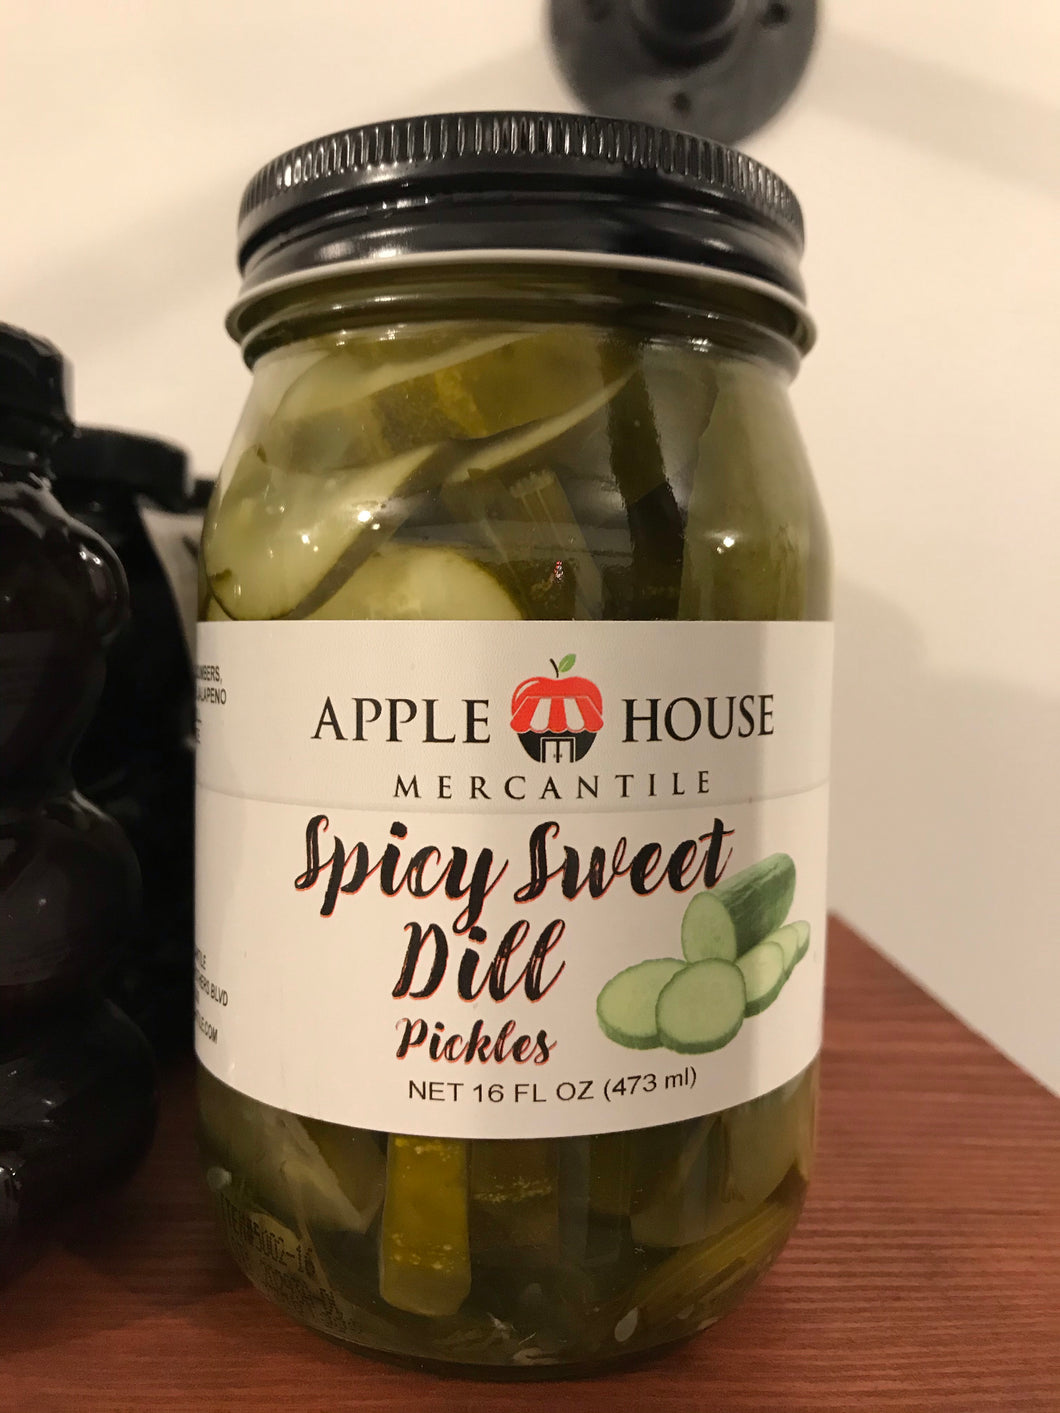 Spicy Sweet Dill Pickles by AHM